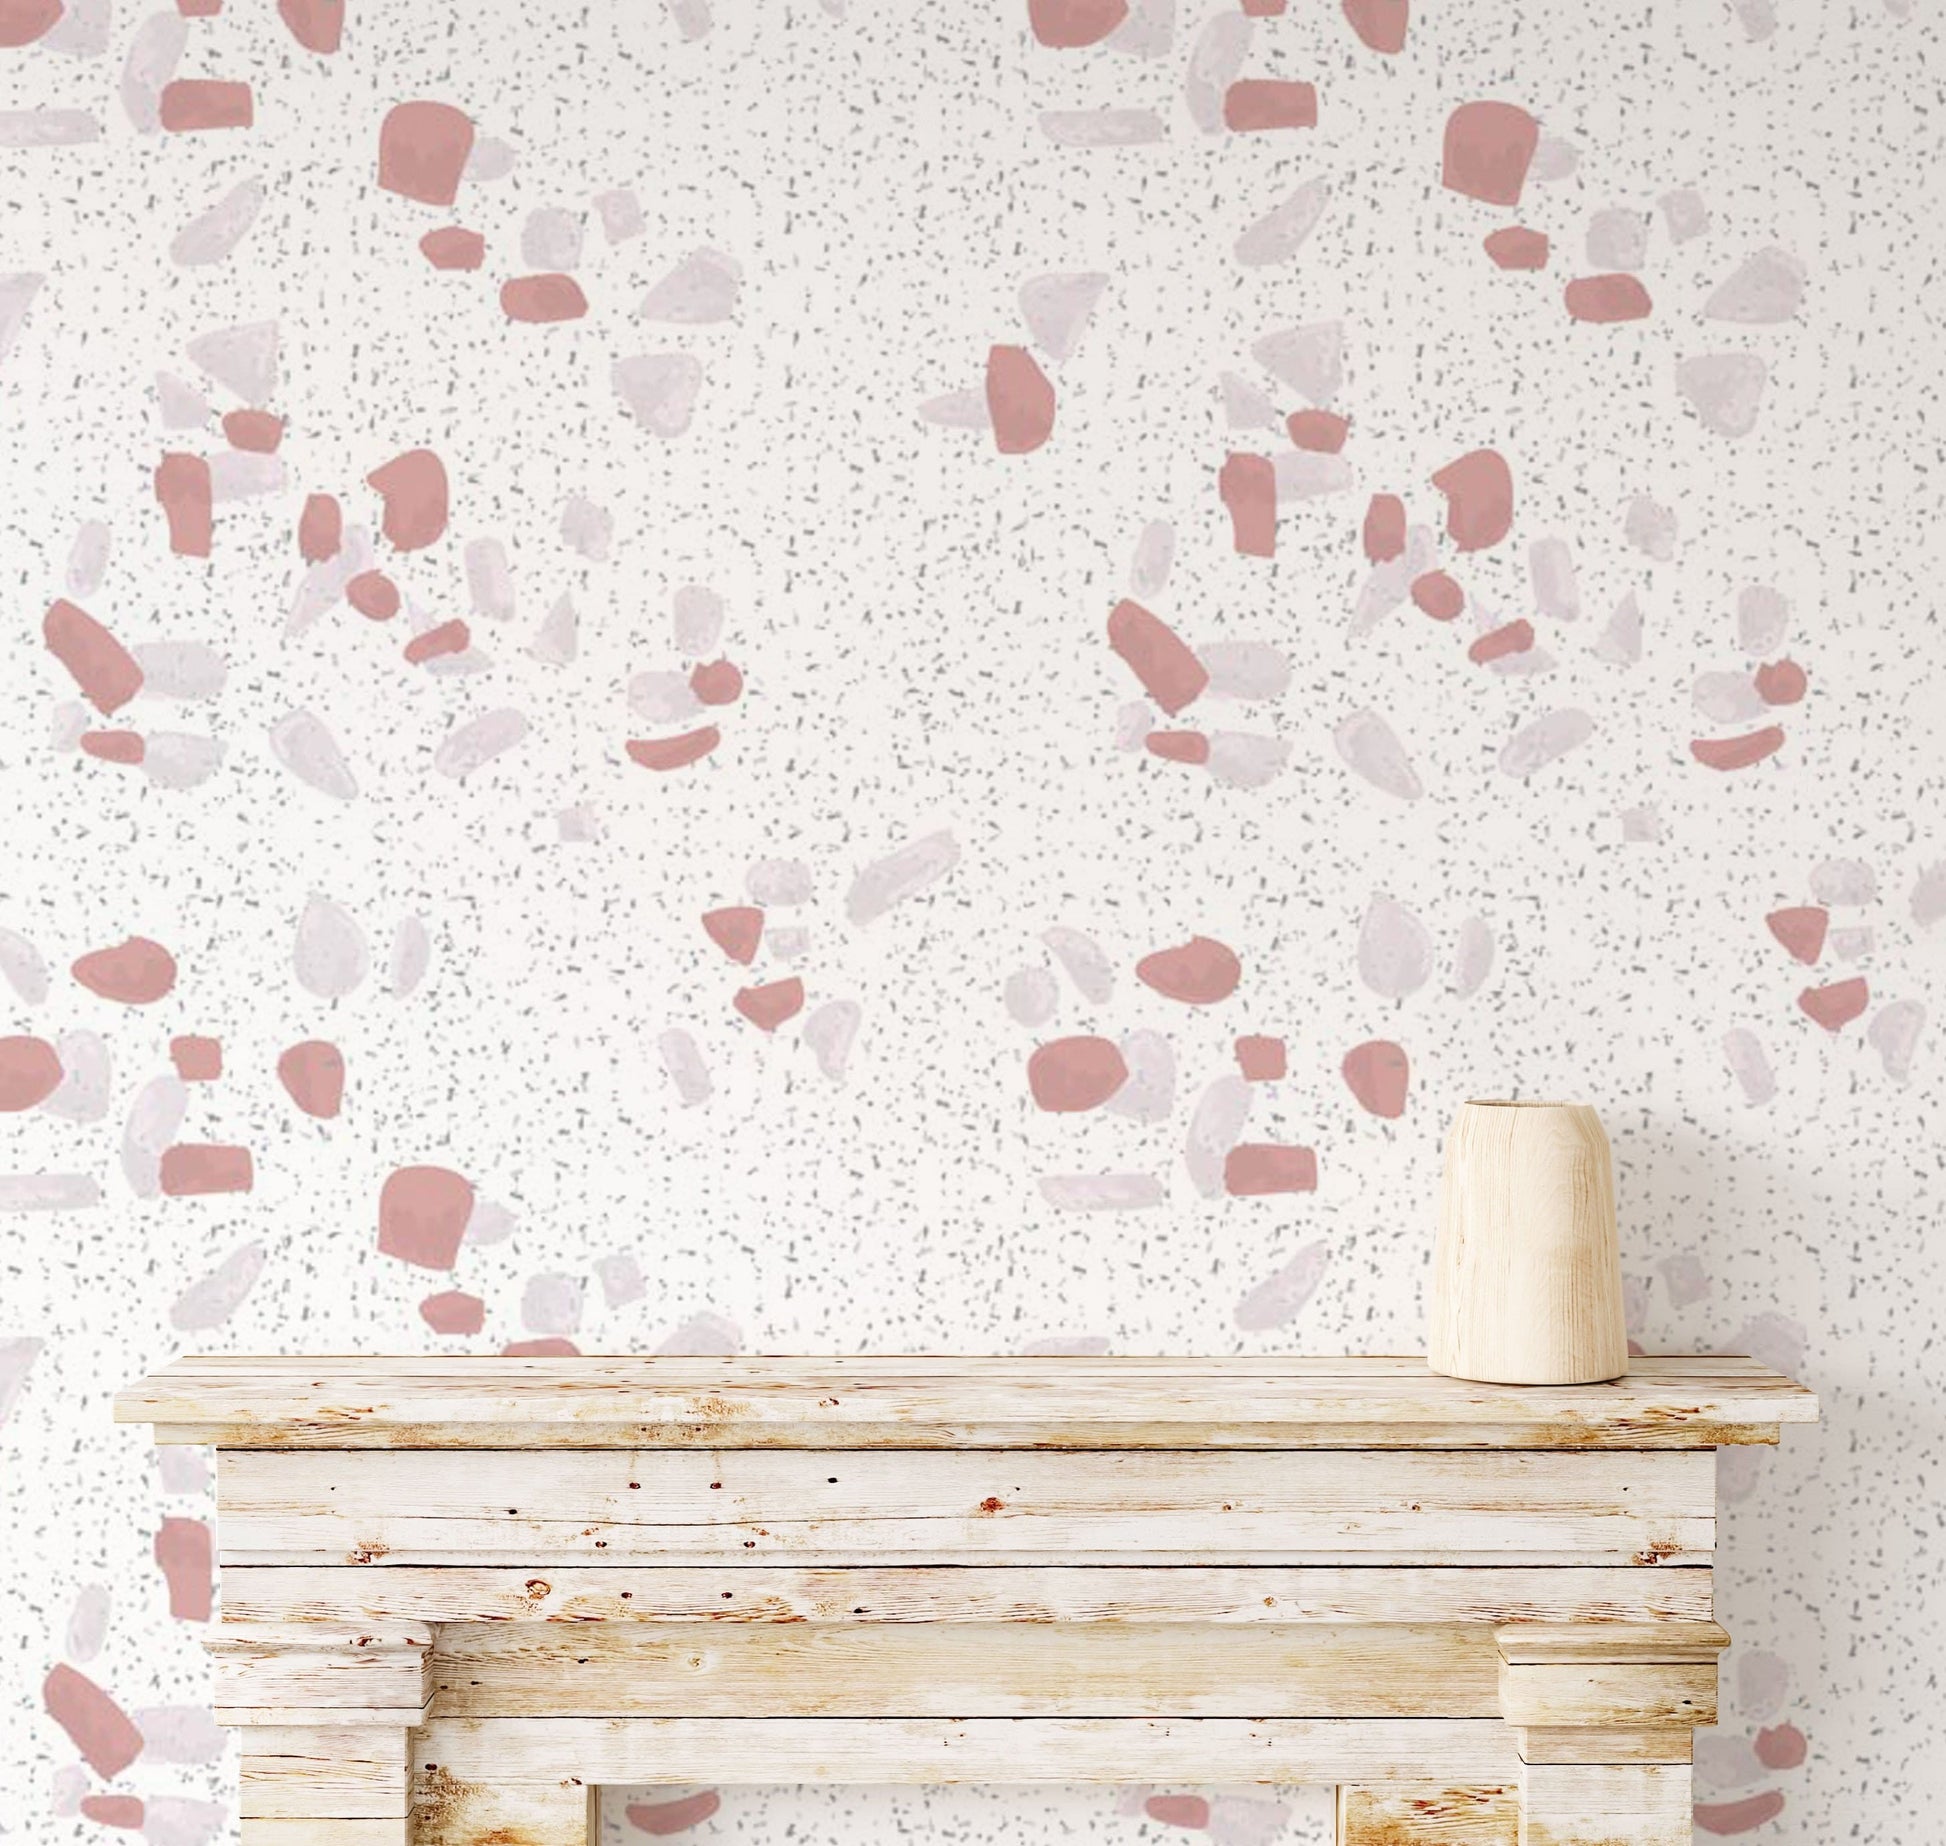 Wallpaper mural in the bedroom featuring a white chip and marble pattern